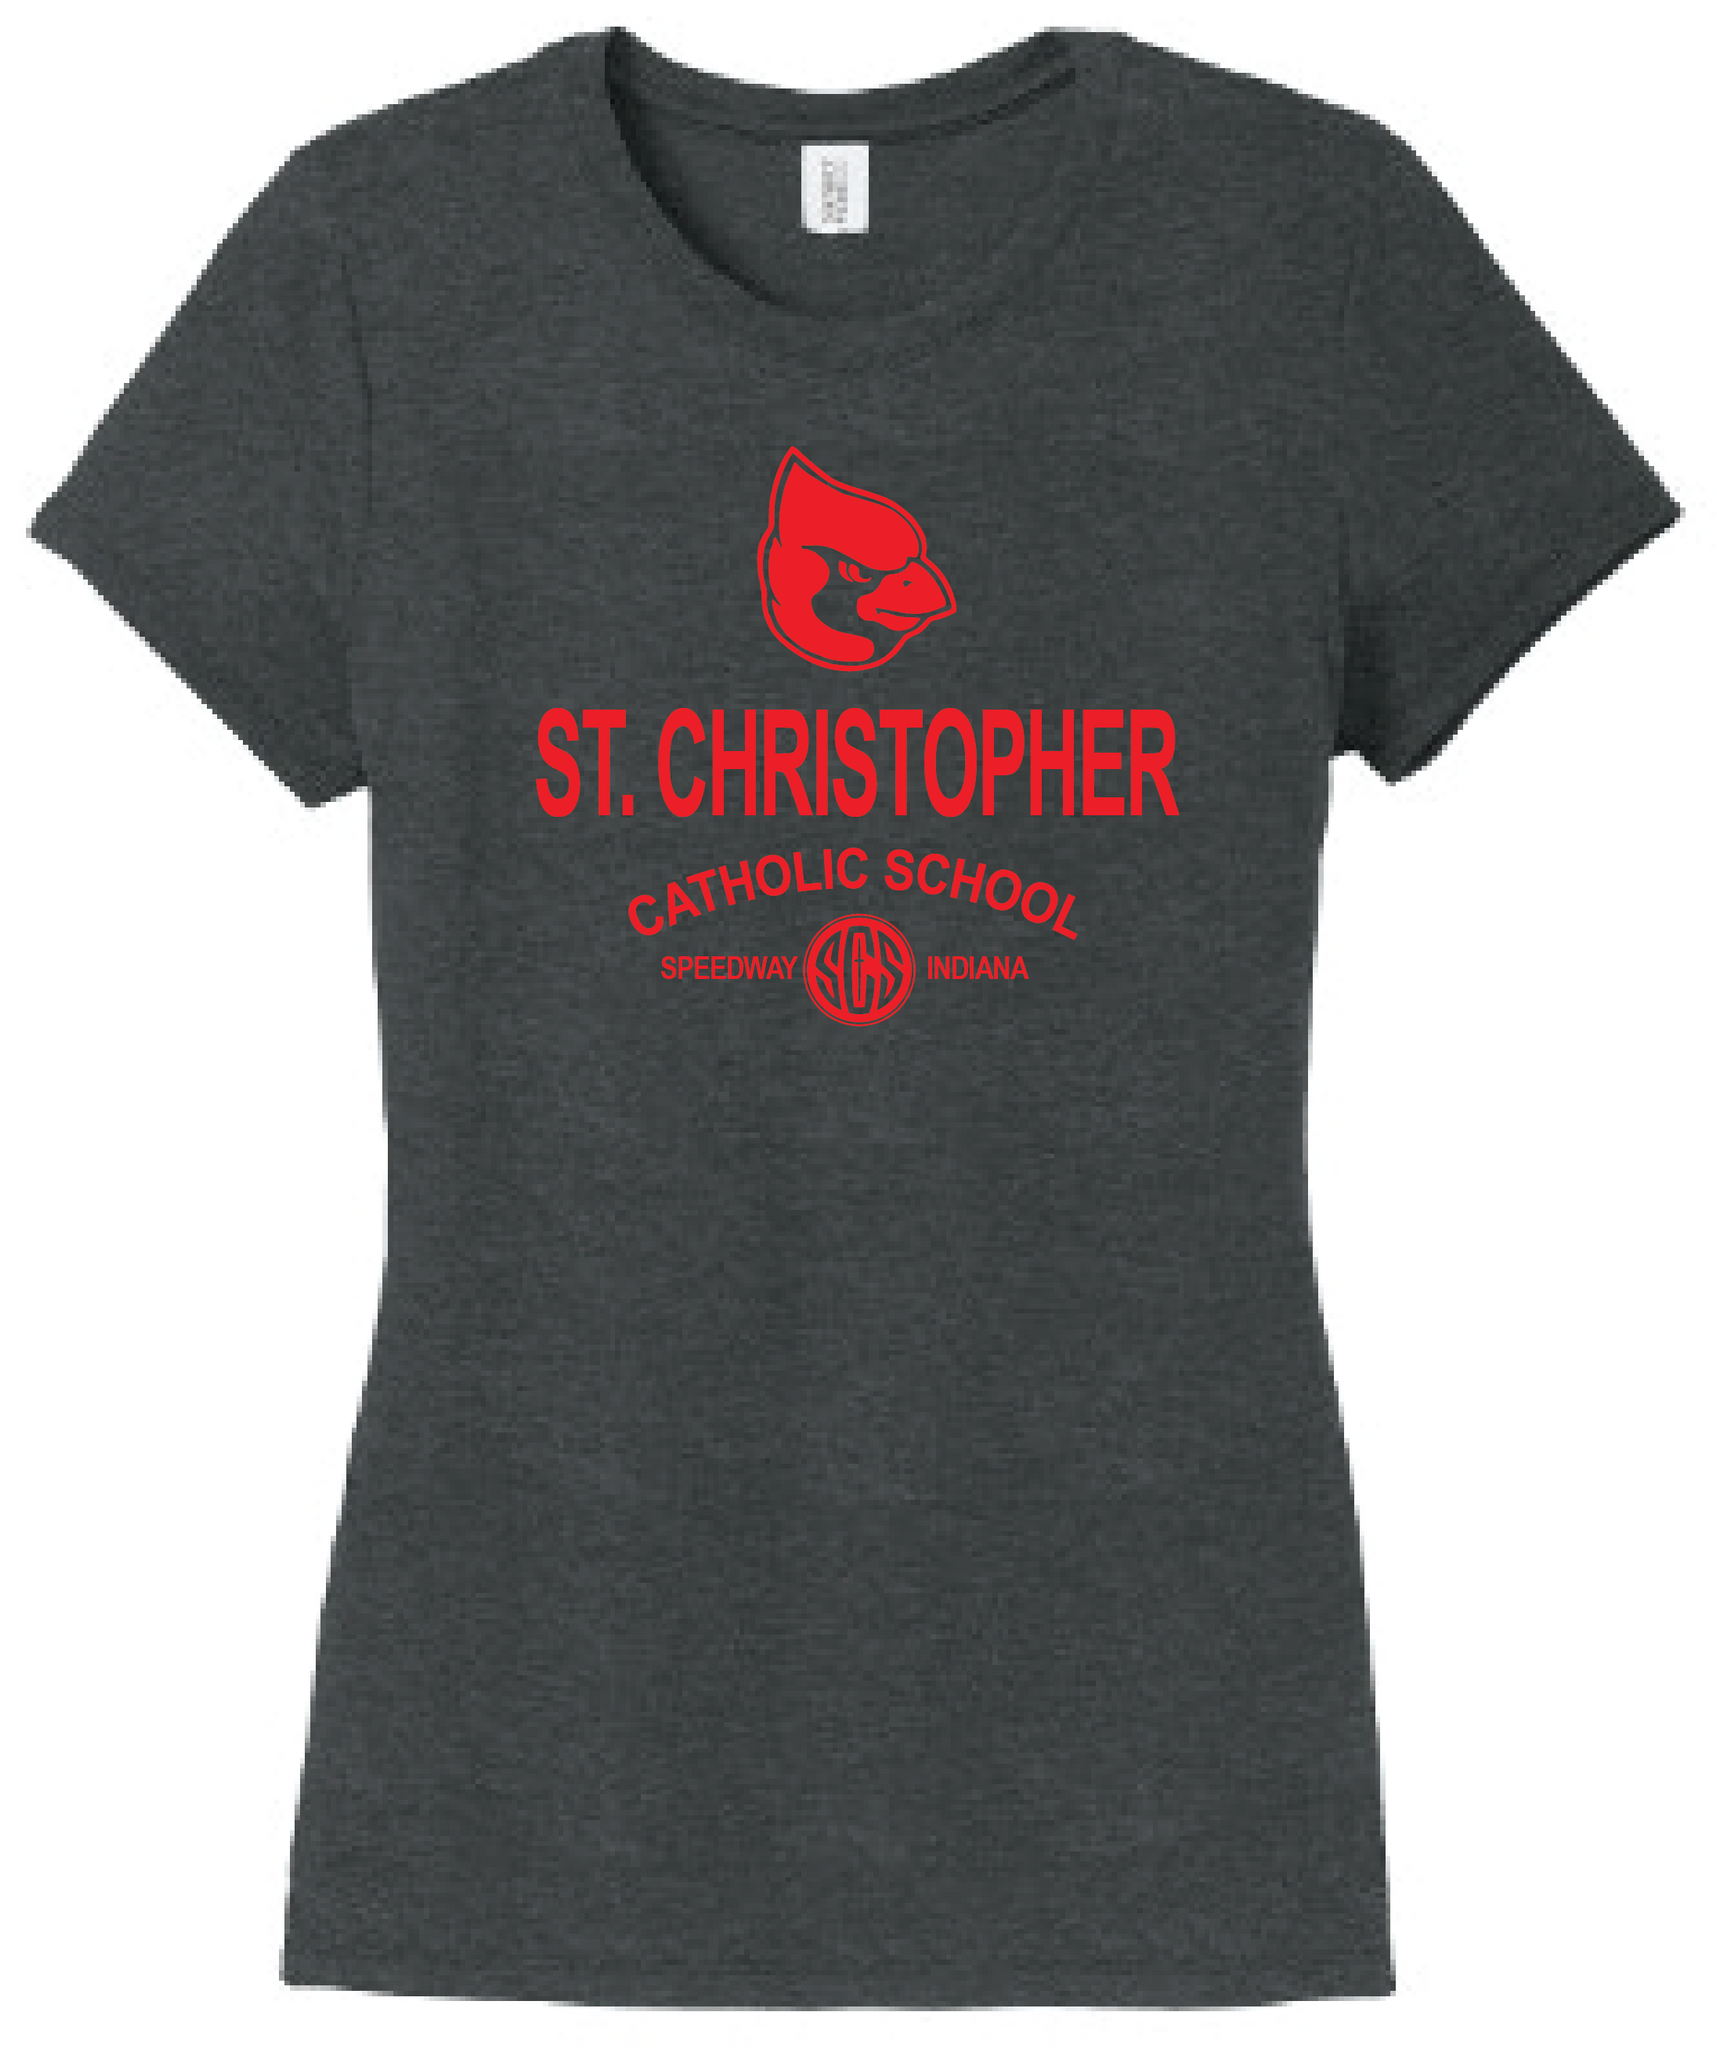 St. Christopher District Made Perfect Tri Ladies T-Shirt - Black Frost